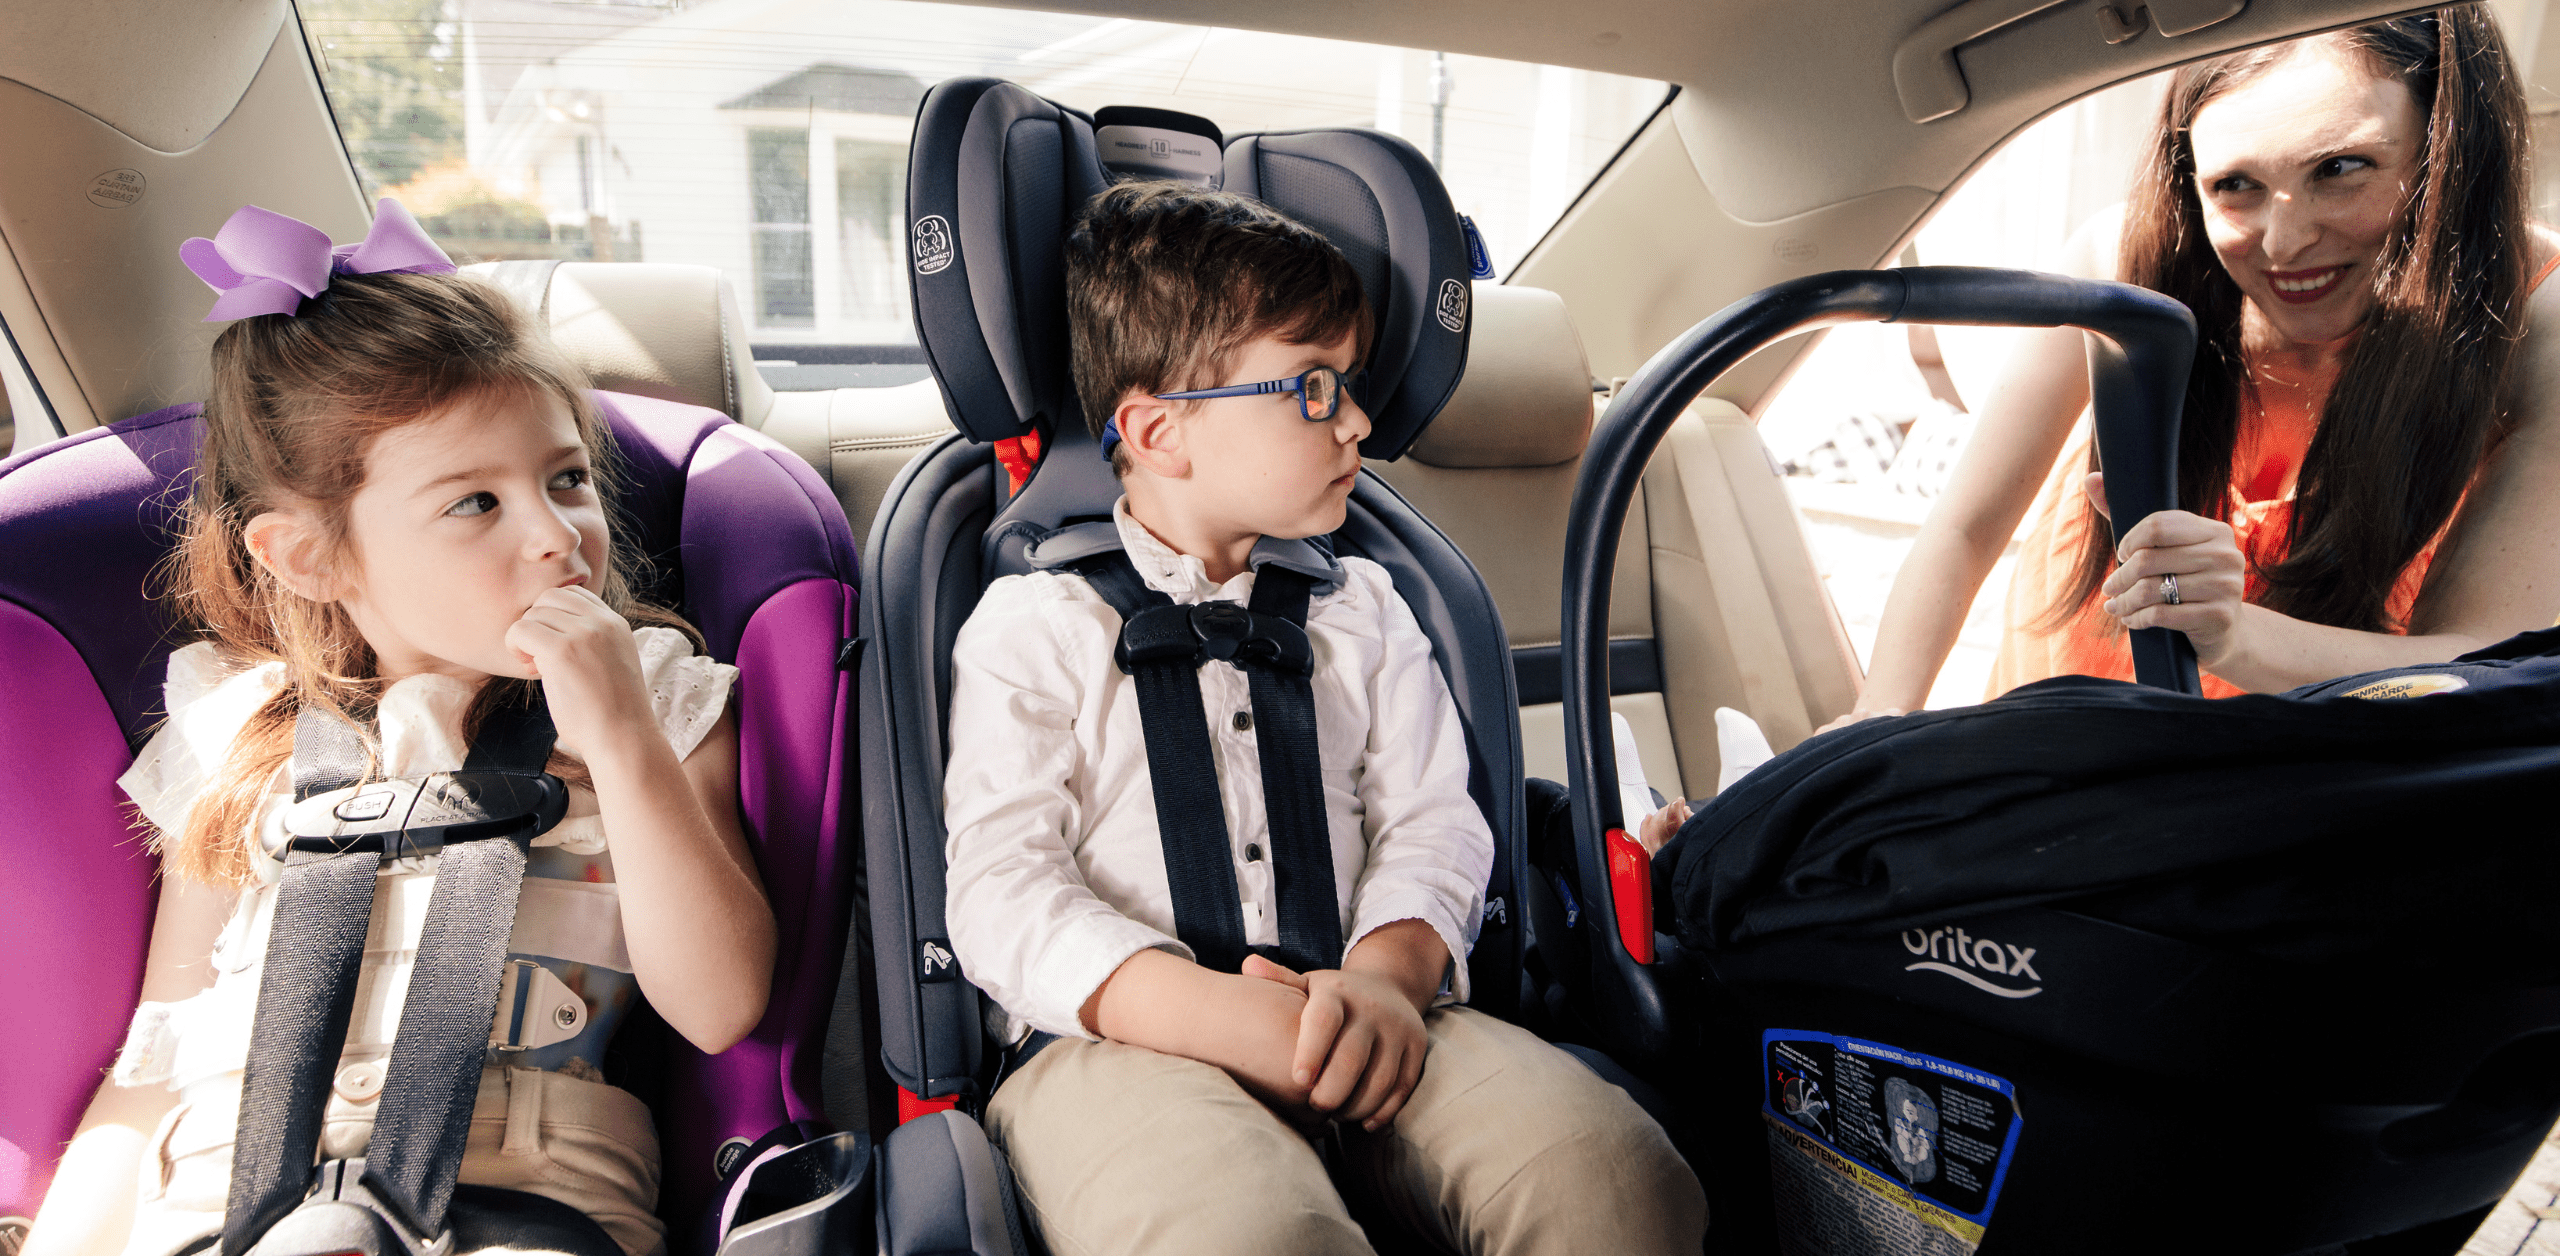 Are foot rests safe for car seats?, by Online Ups